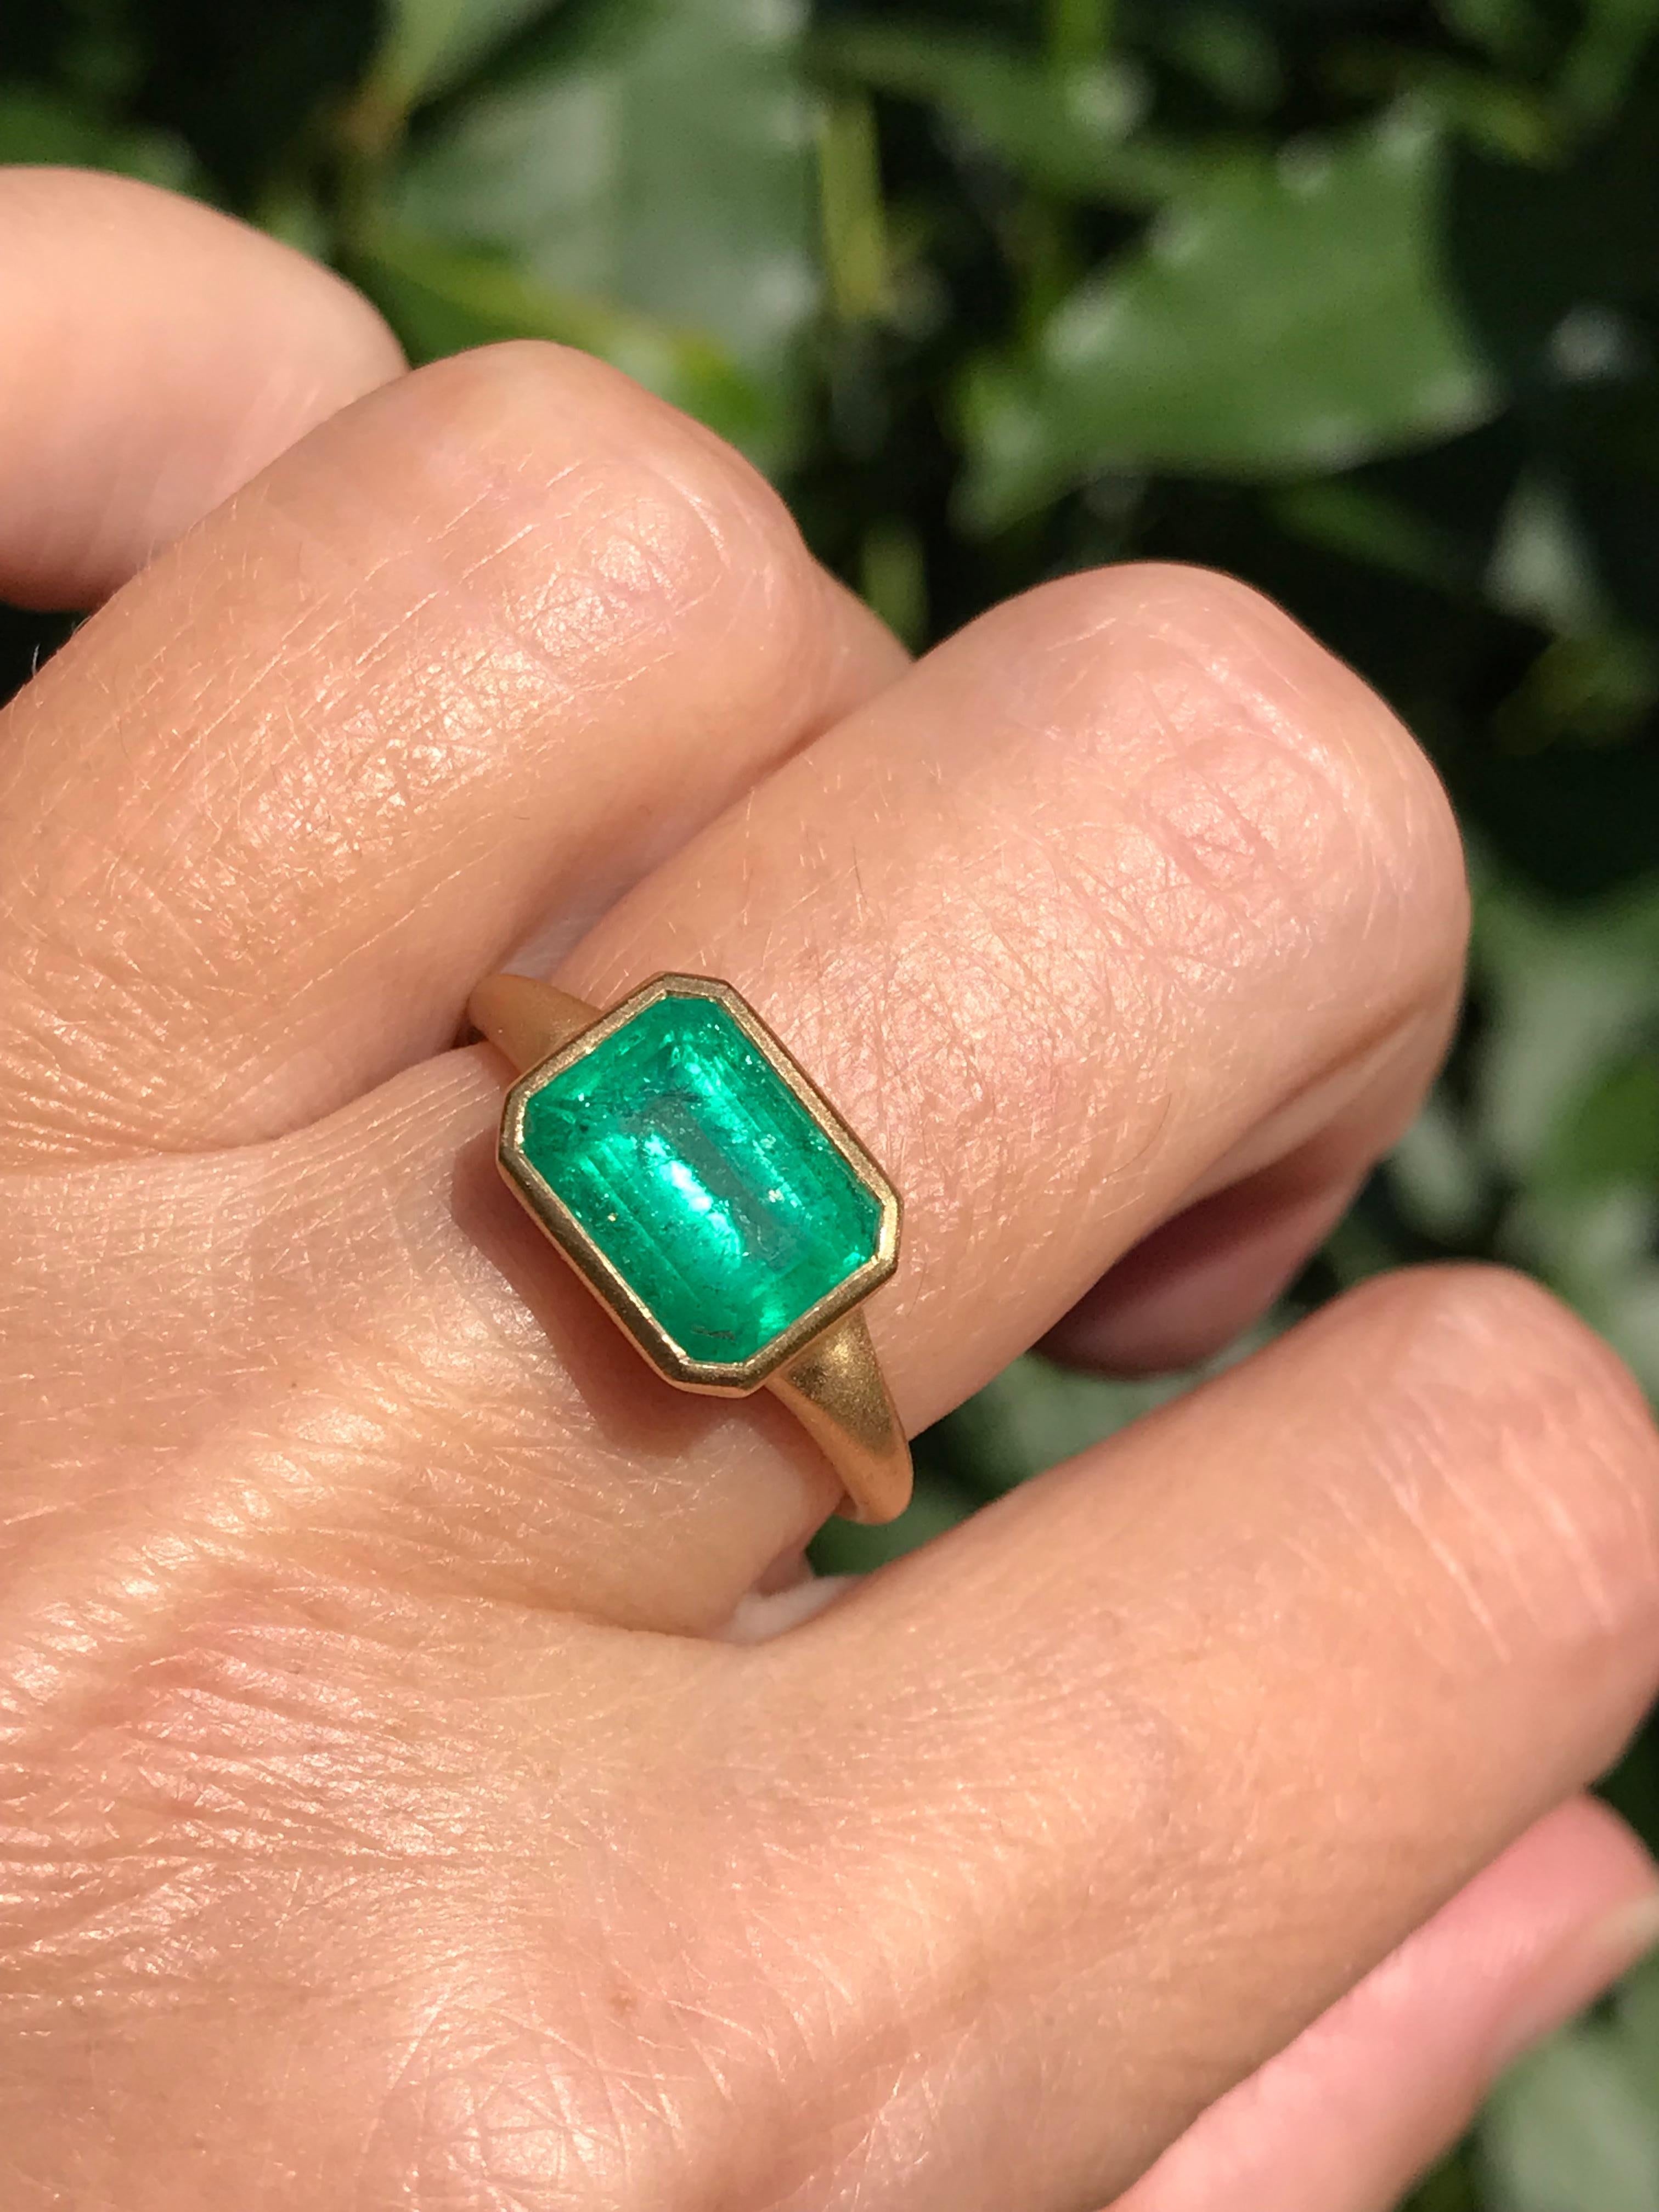 Dalben design One of a Kind 18k yellow gold satin finishing ring with a 2,46 carat bezel-set emerald cut emerald. 
Ring size6 3/4+ USA , 54 EU  re-sizable to most finger sizes. 
Bezel stone dimensions :
width 10,9 mm
height 8,6 mm
The ring has been